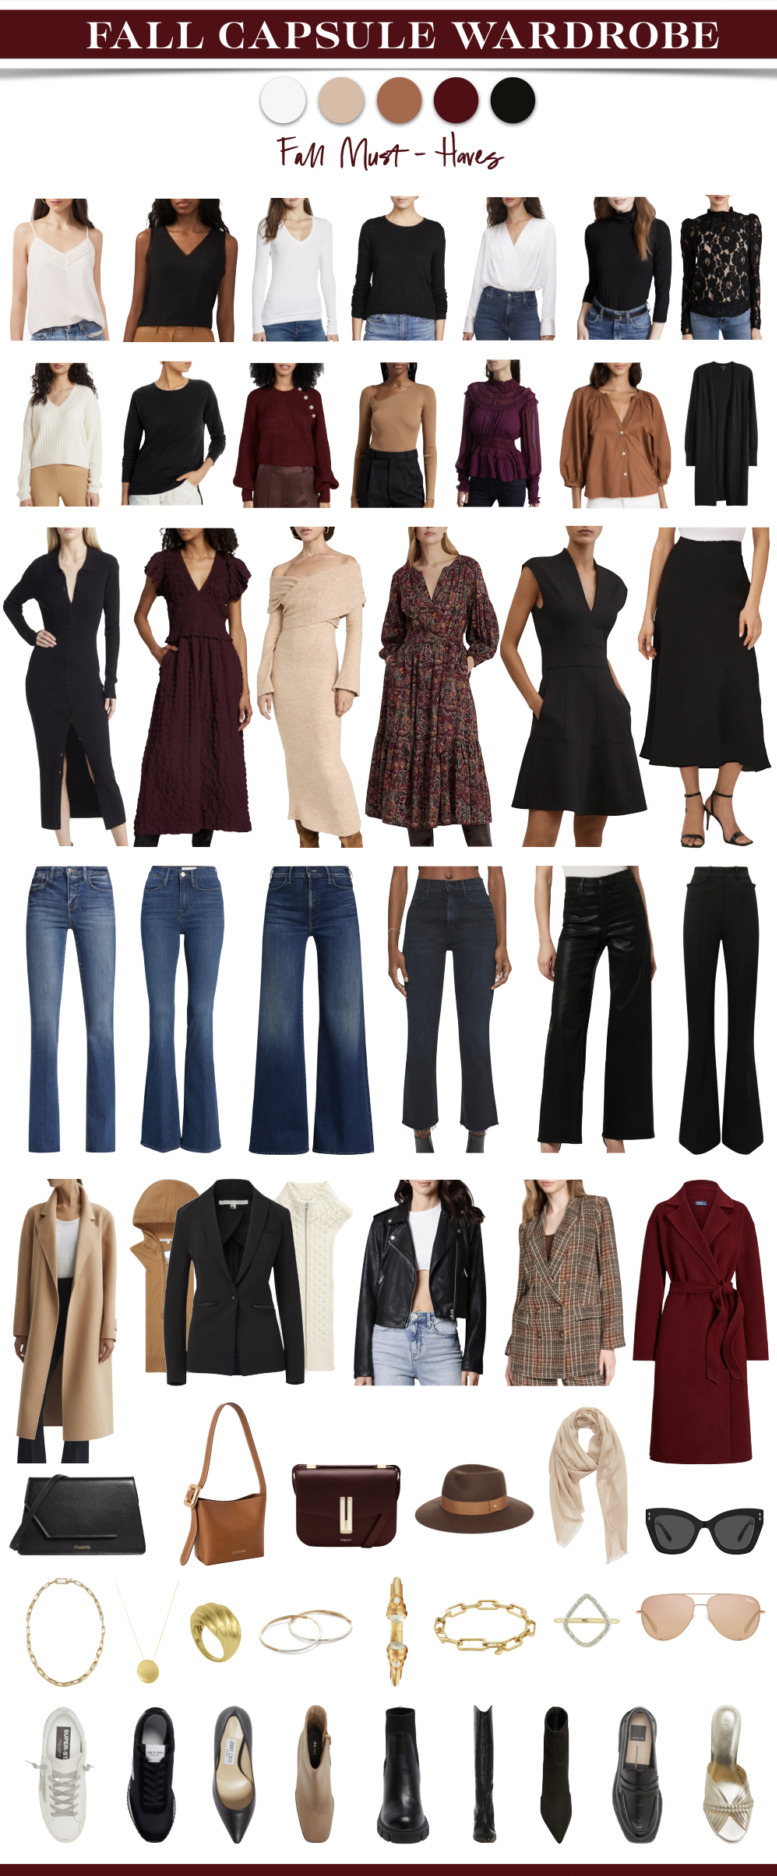 collage of clothing items for Fall Capsule Wardrobe